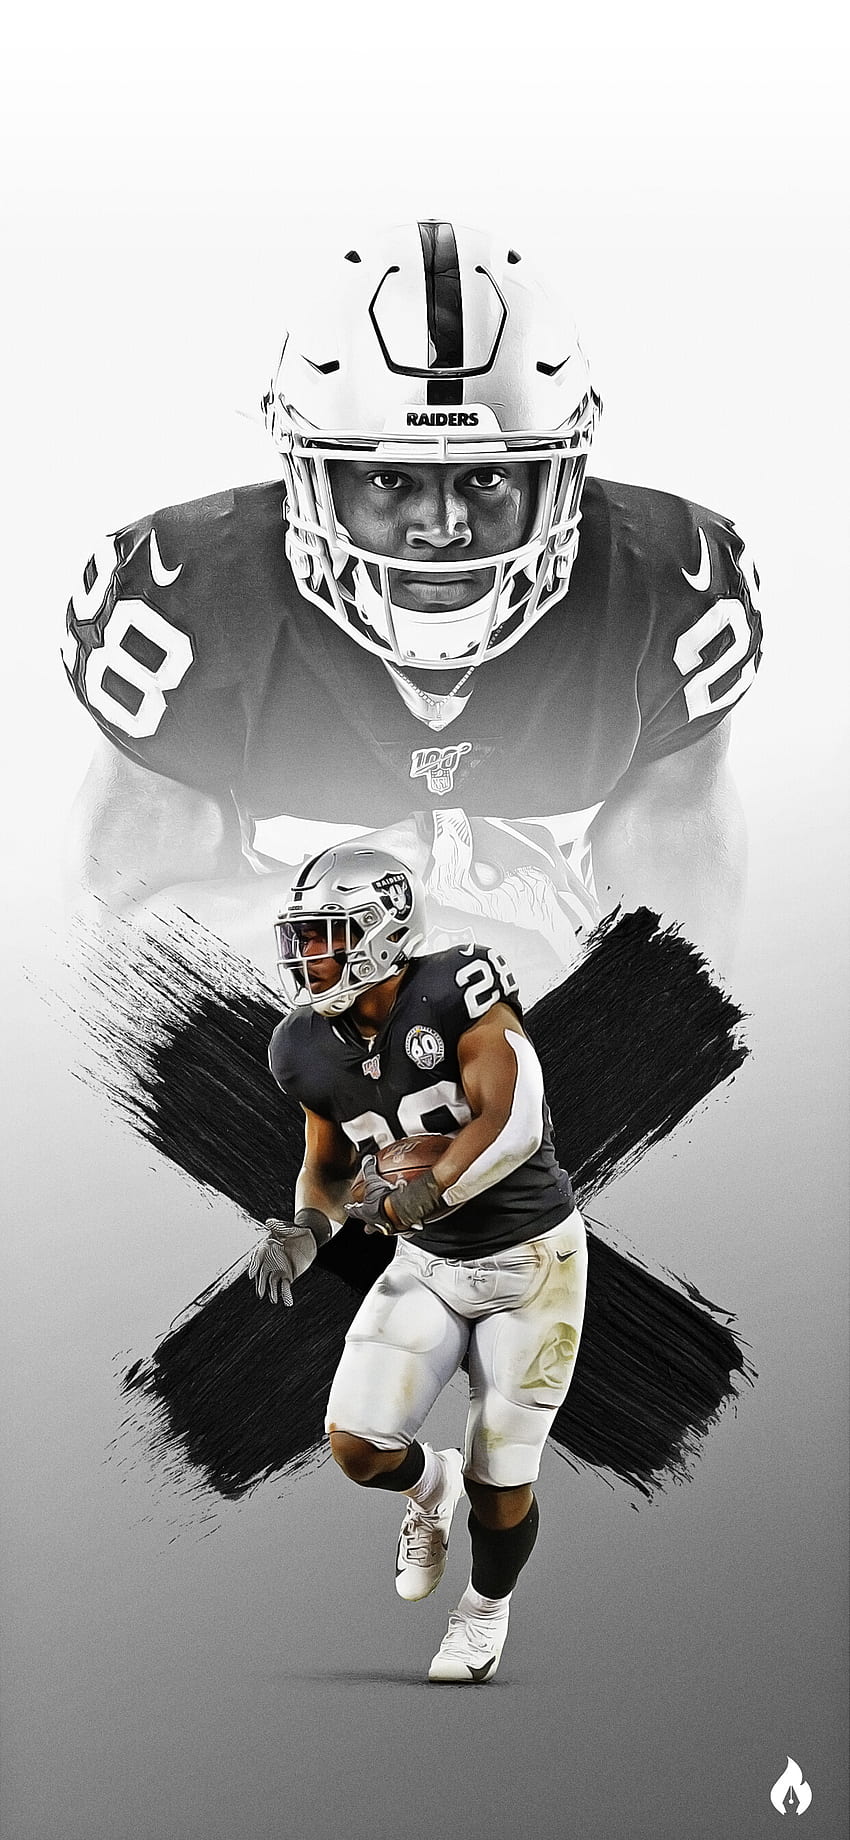 Josh Jacobs Used Adversity to Become the Raiders Premier Running Back   Franchise Sports Media